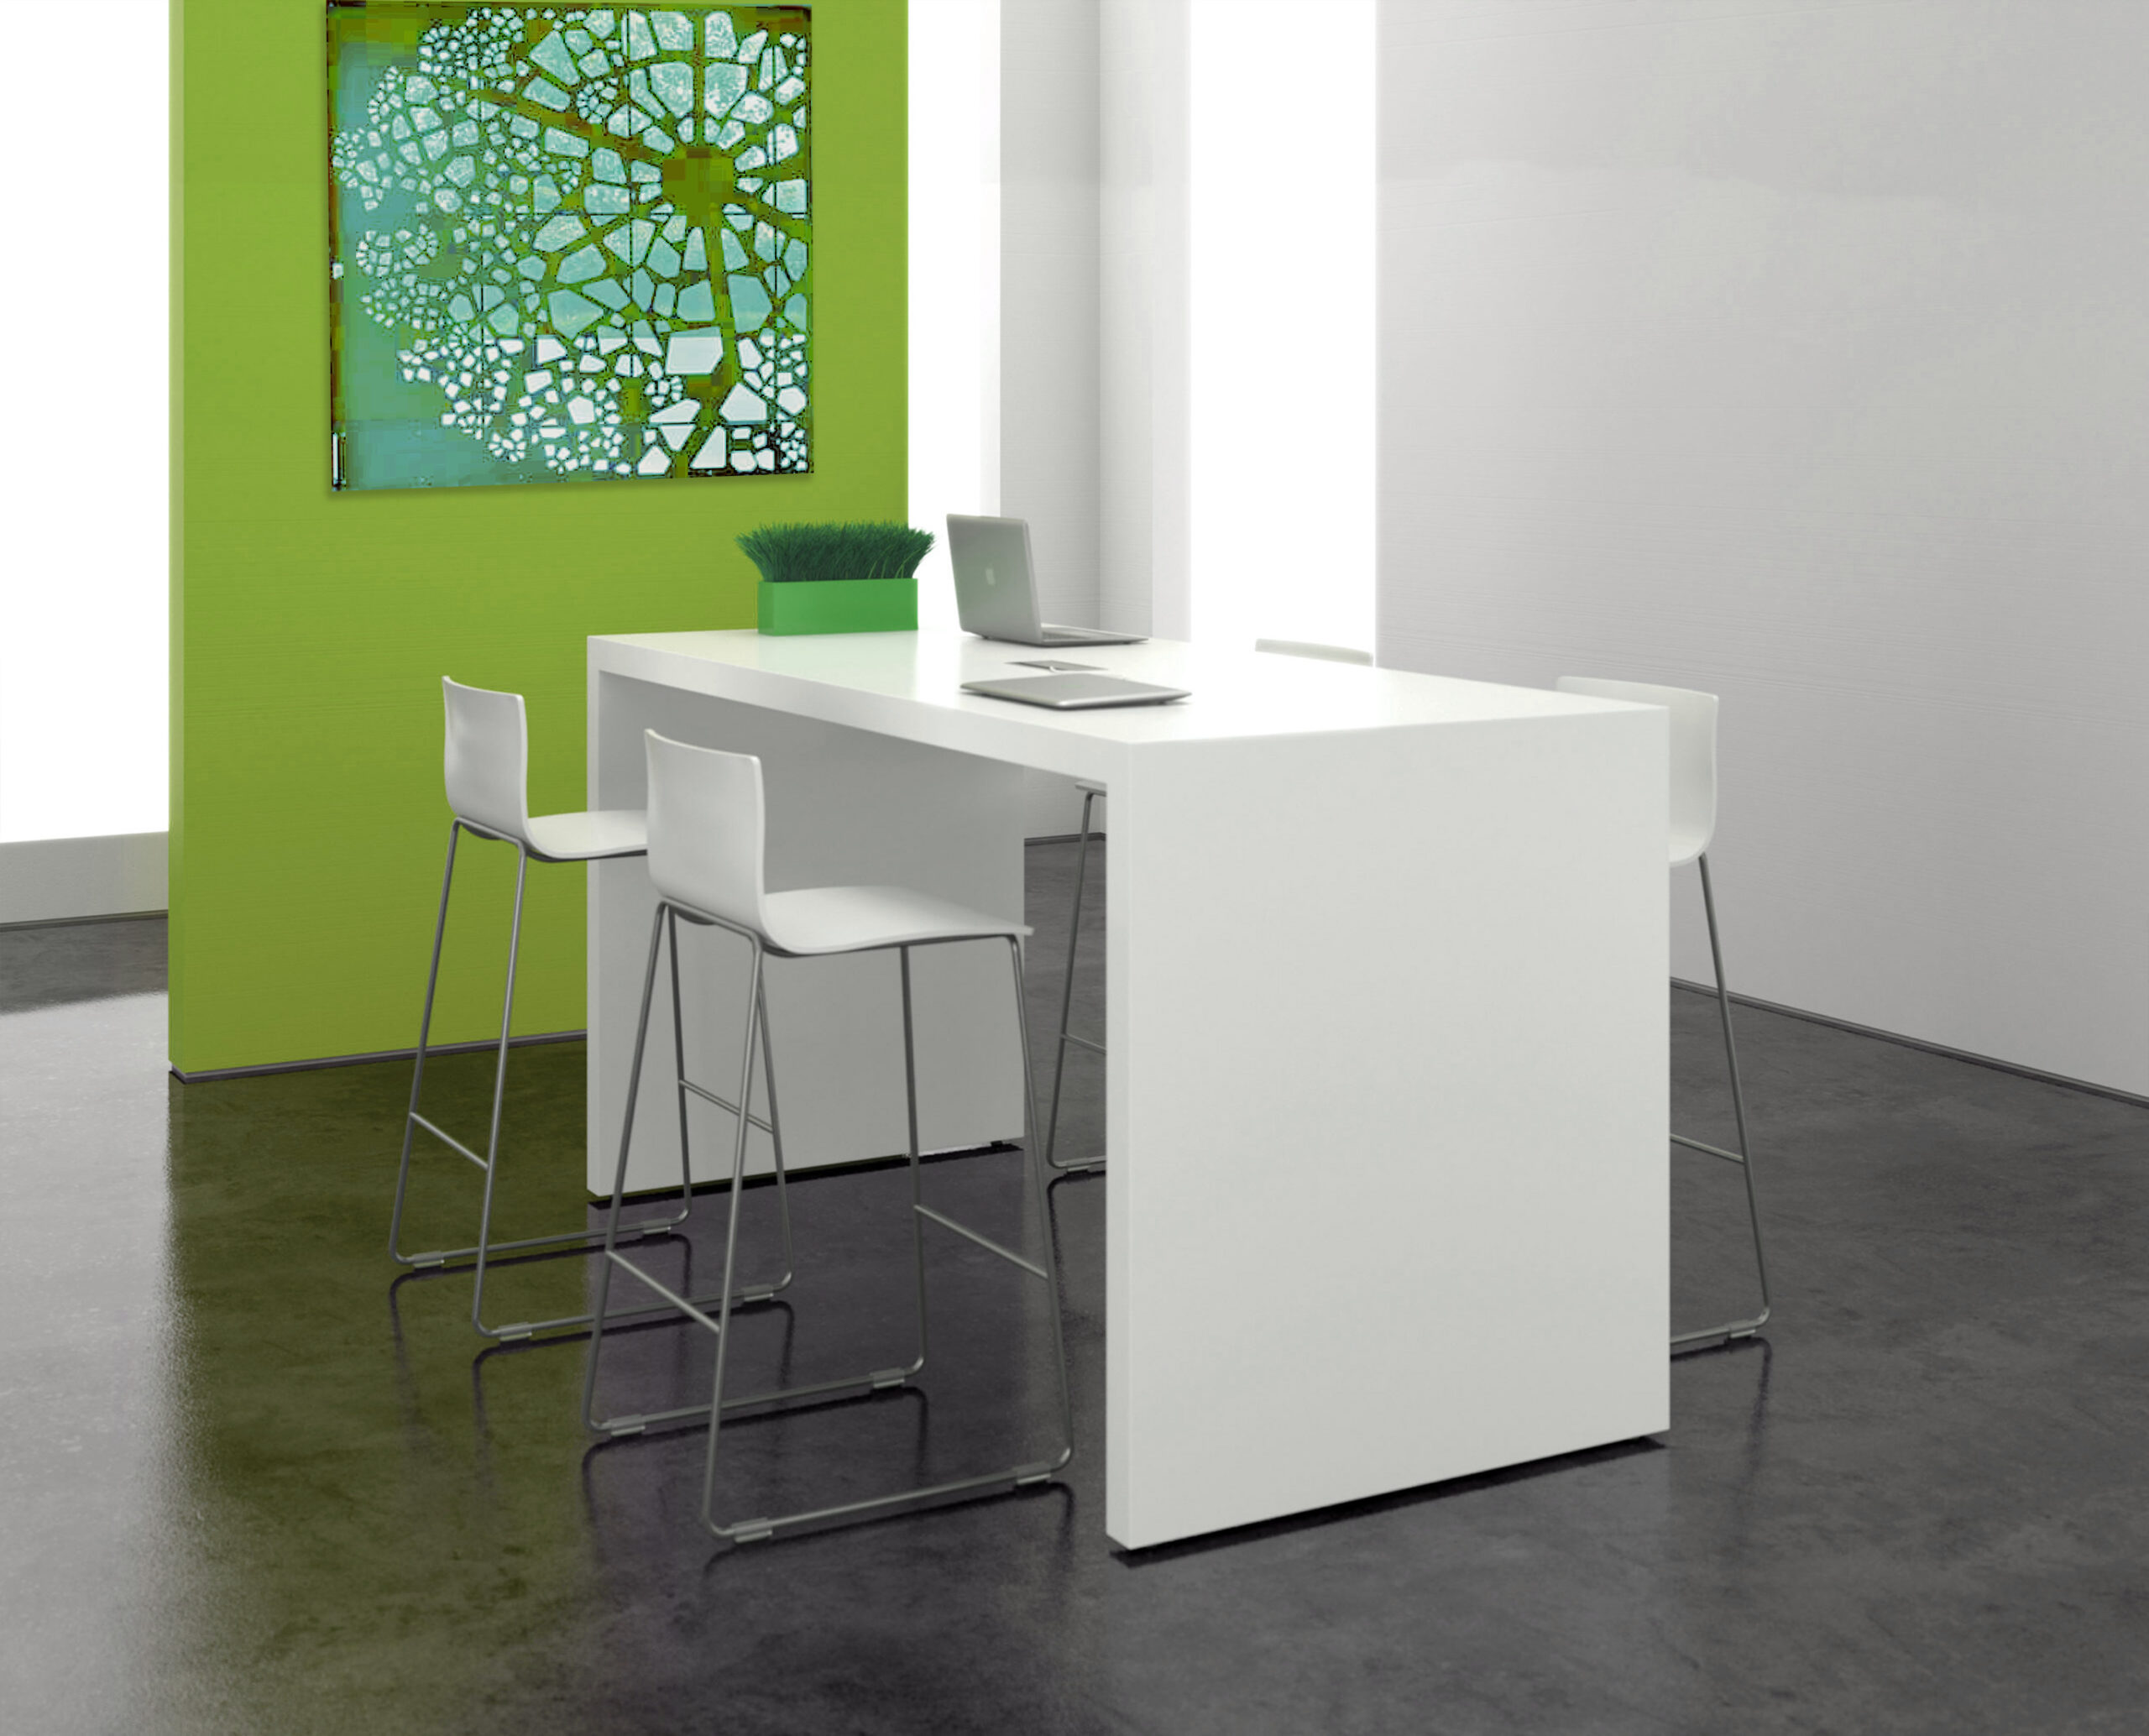 Outstanding Premium White Standing Table quality build and design for modern office and home environments with optional power and data